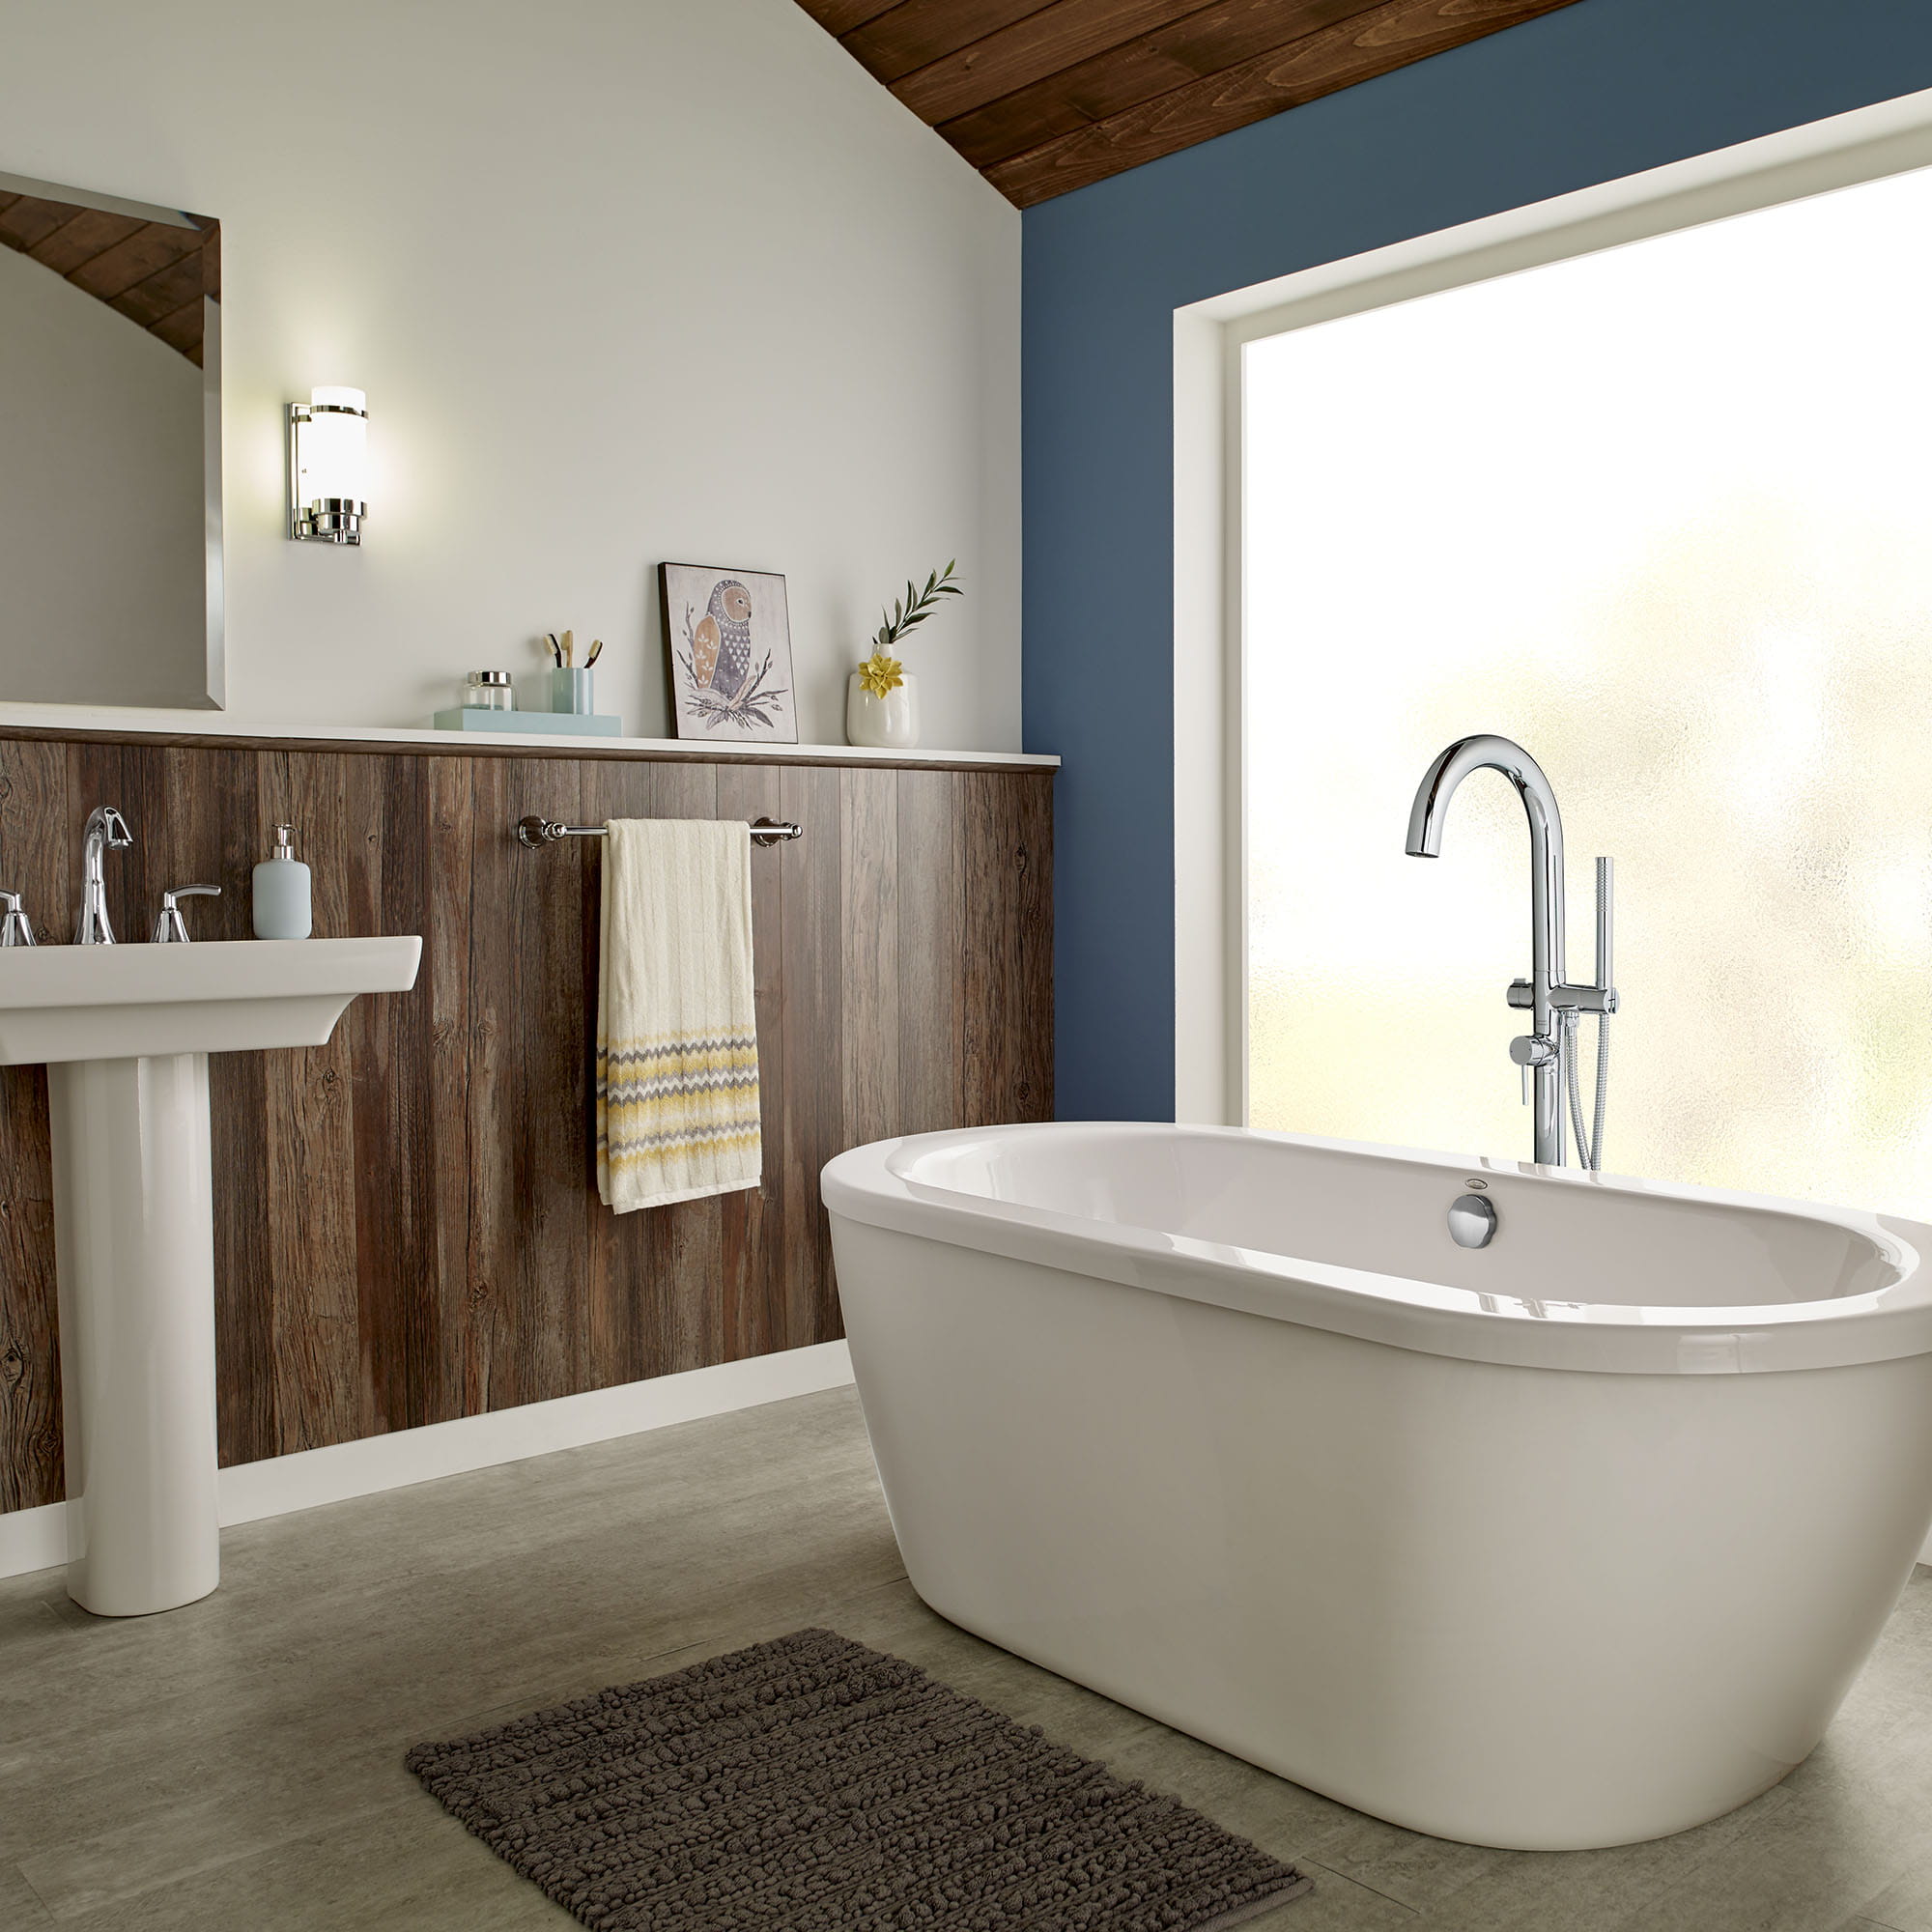 Cadet 66 x 32 Inch Freestanding Bathtub With Brushed Nickel Finish Filler and Drain Kit ARCTIC